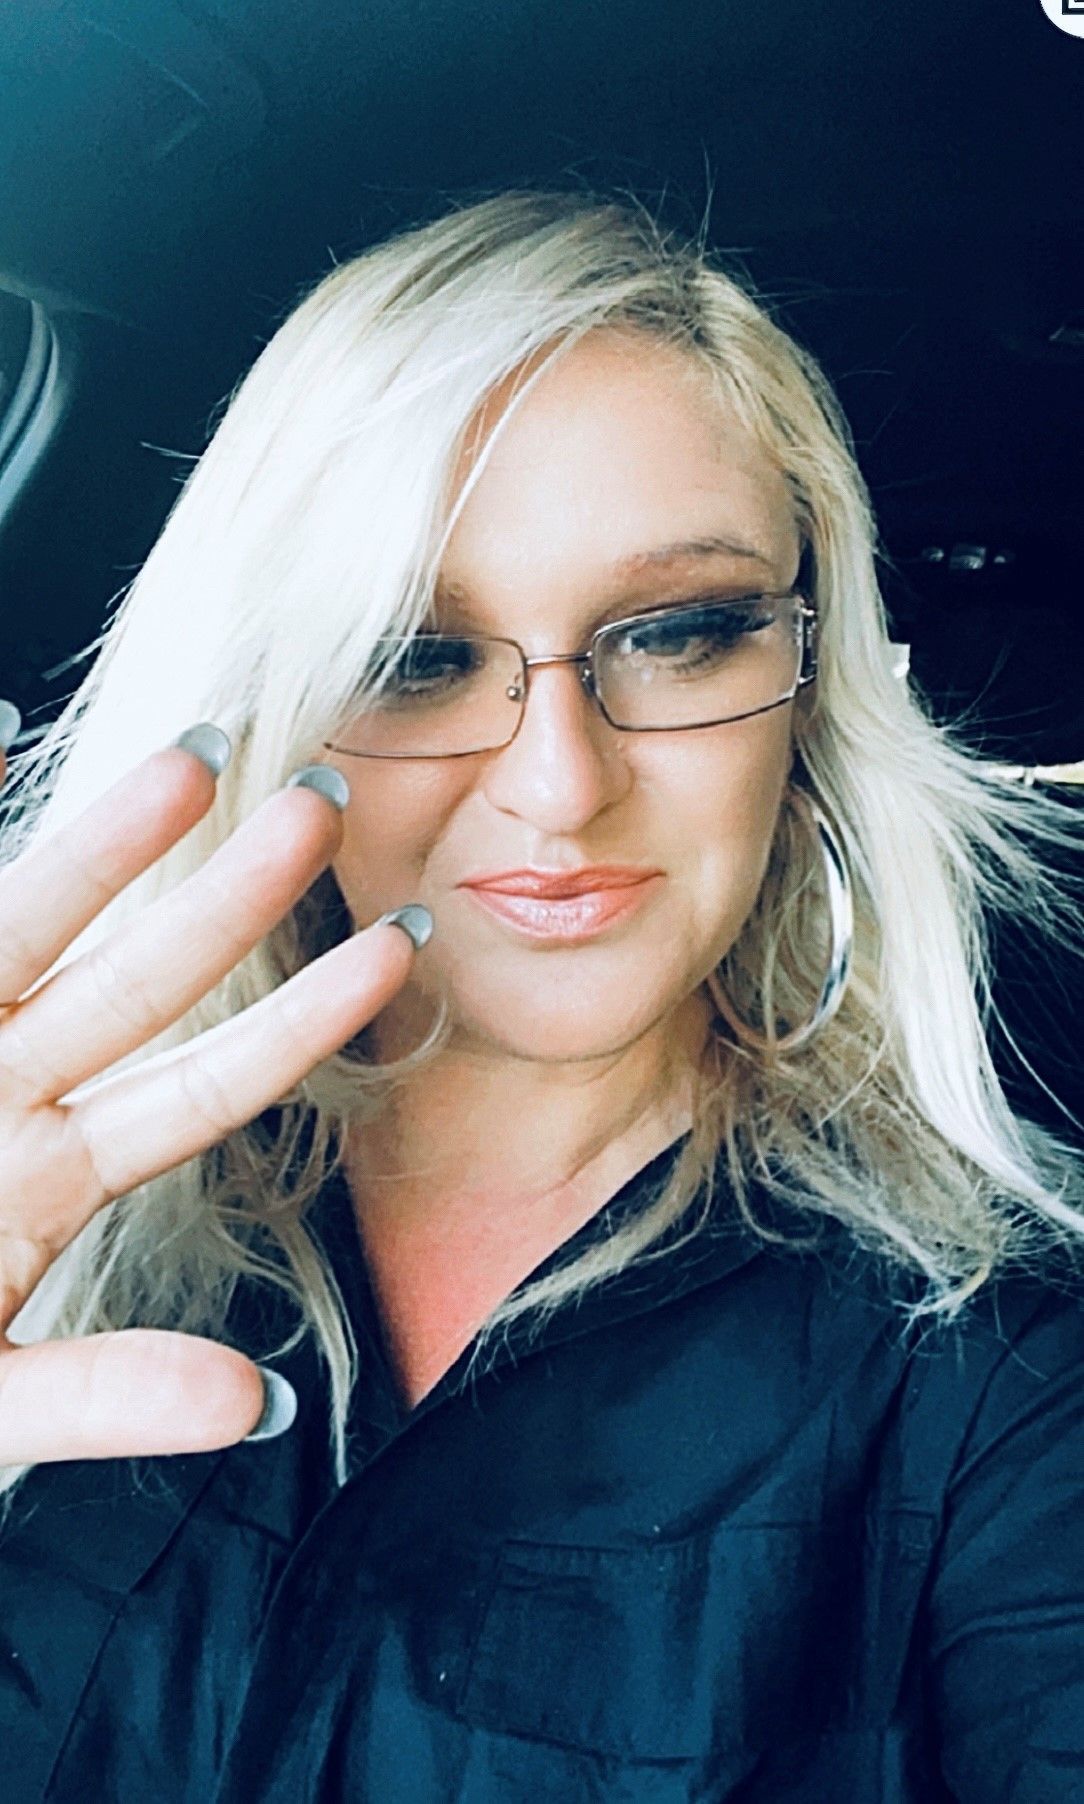 A woman wearing glasses and a black shirt is taking a selfie in a car.